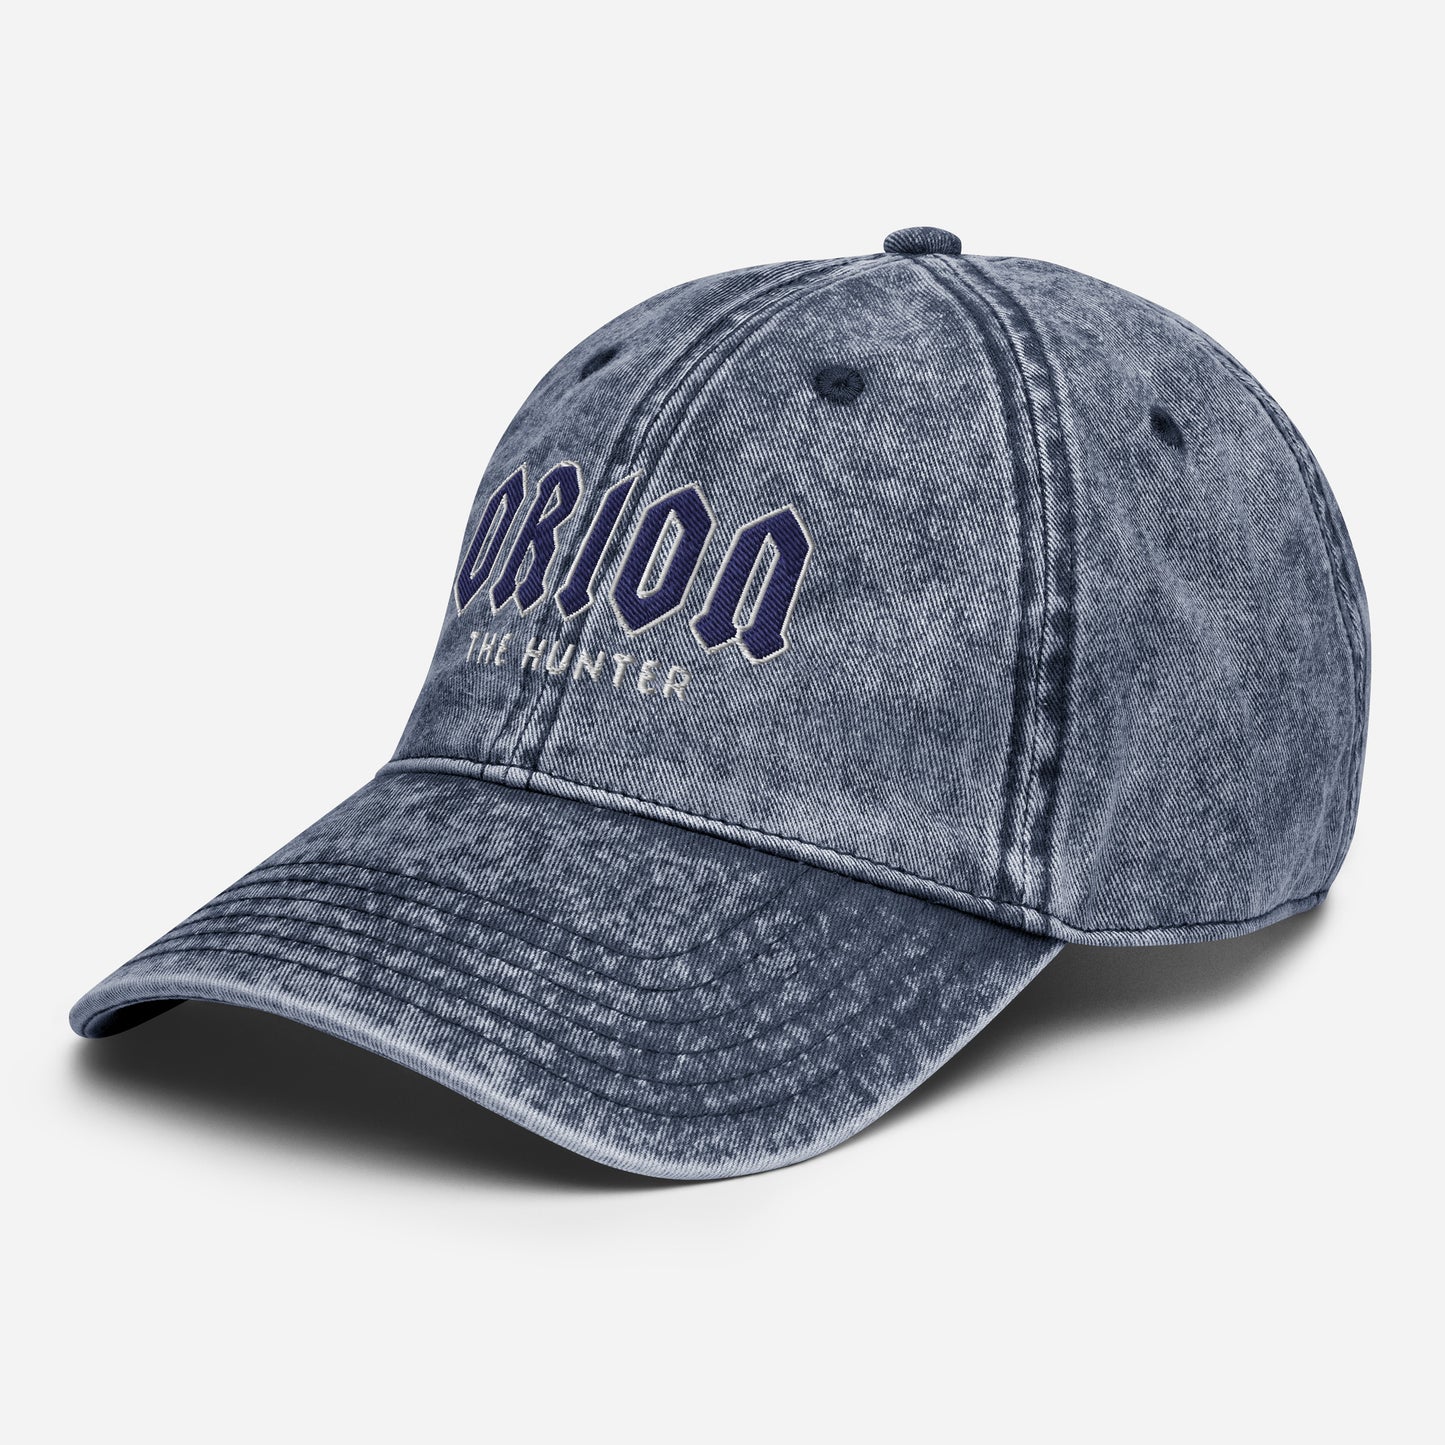 Orion Zodiac Academy Embroidered Vintage Hat Navy